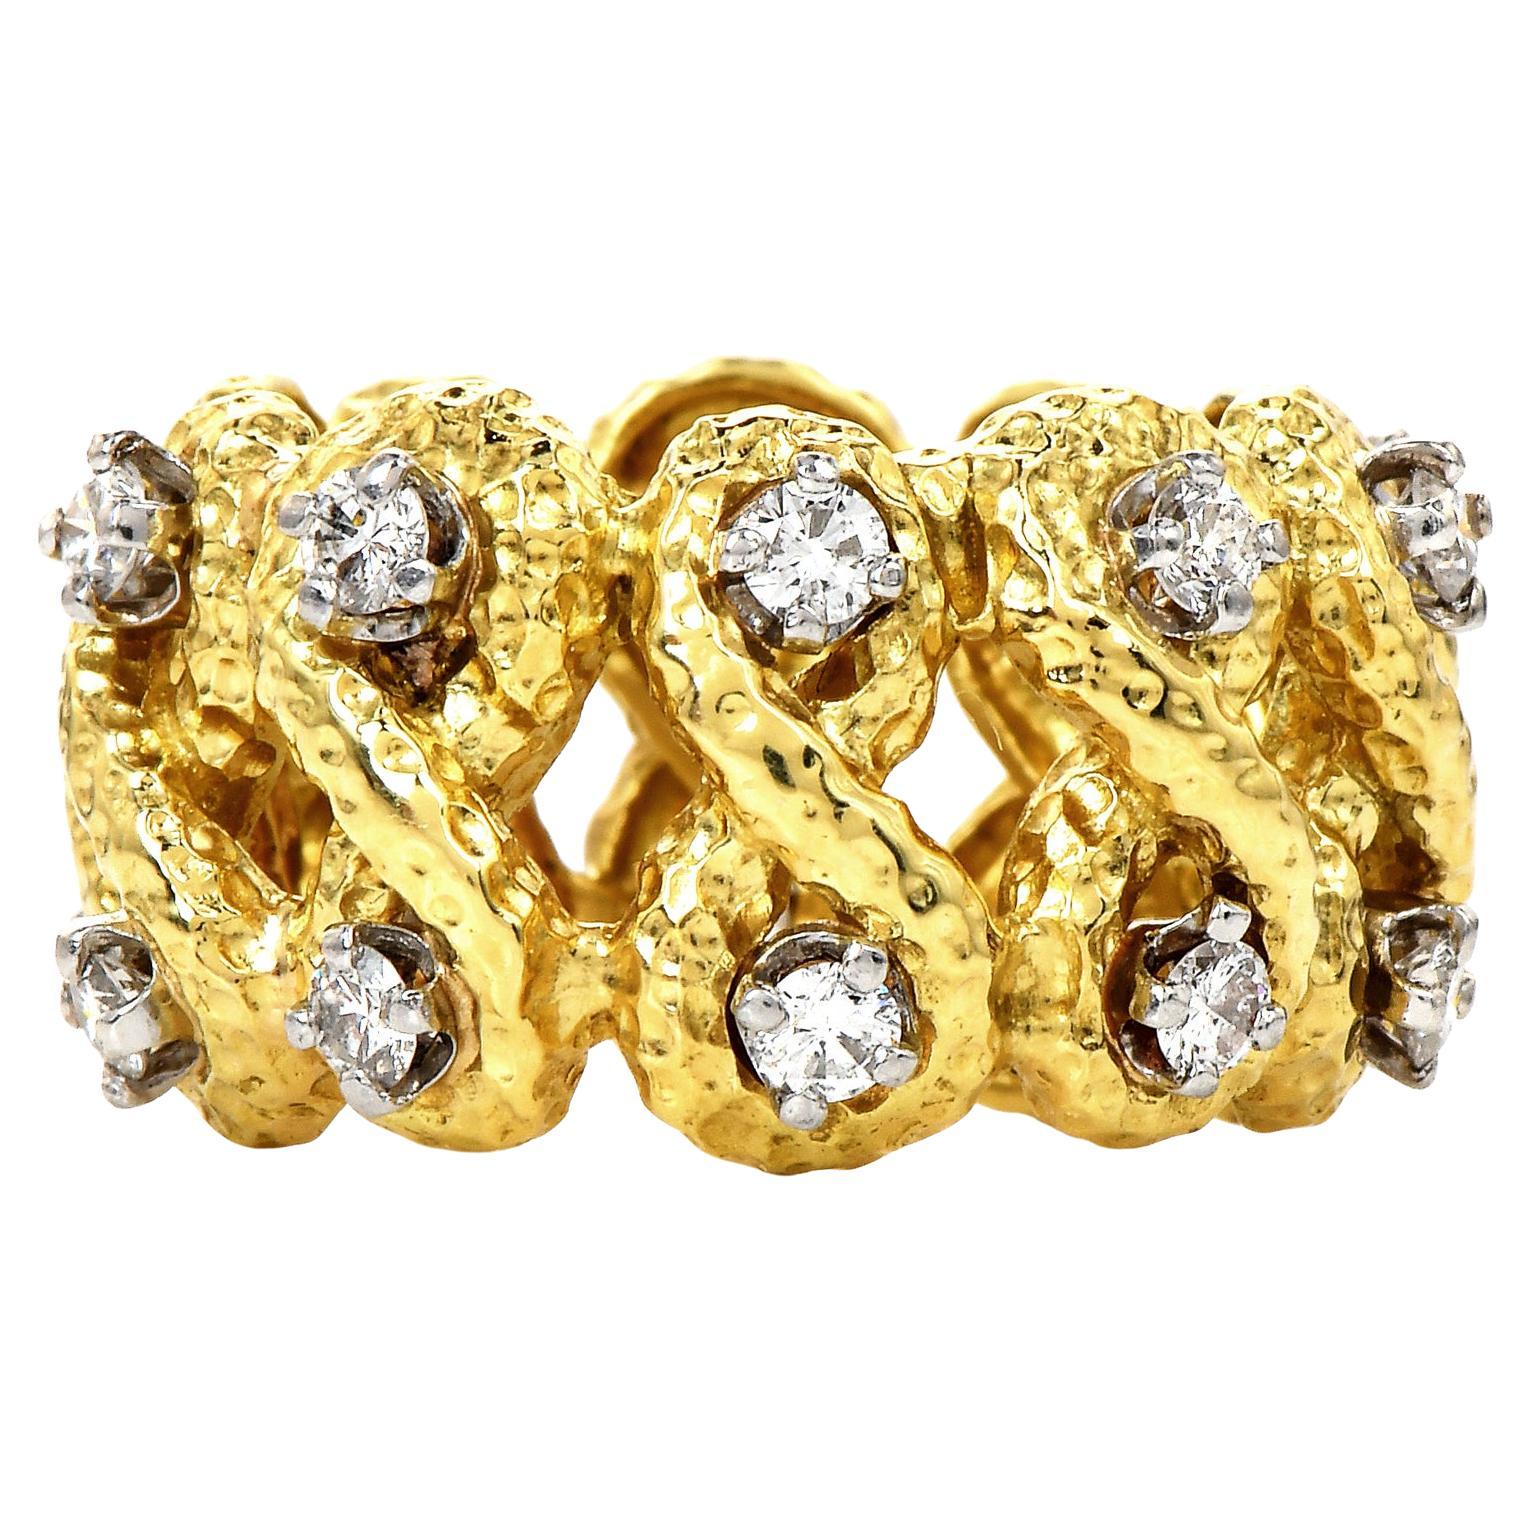 From the known designer David Webb, this eternity band ring is a glamorous way of enhancing your Gold jewelry.

Crafted in solid 18K yellow gold with a textured finish & diamond set on Platinum.

All the Infinity-shape links have two Genuine